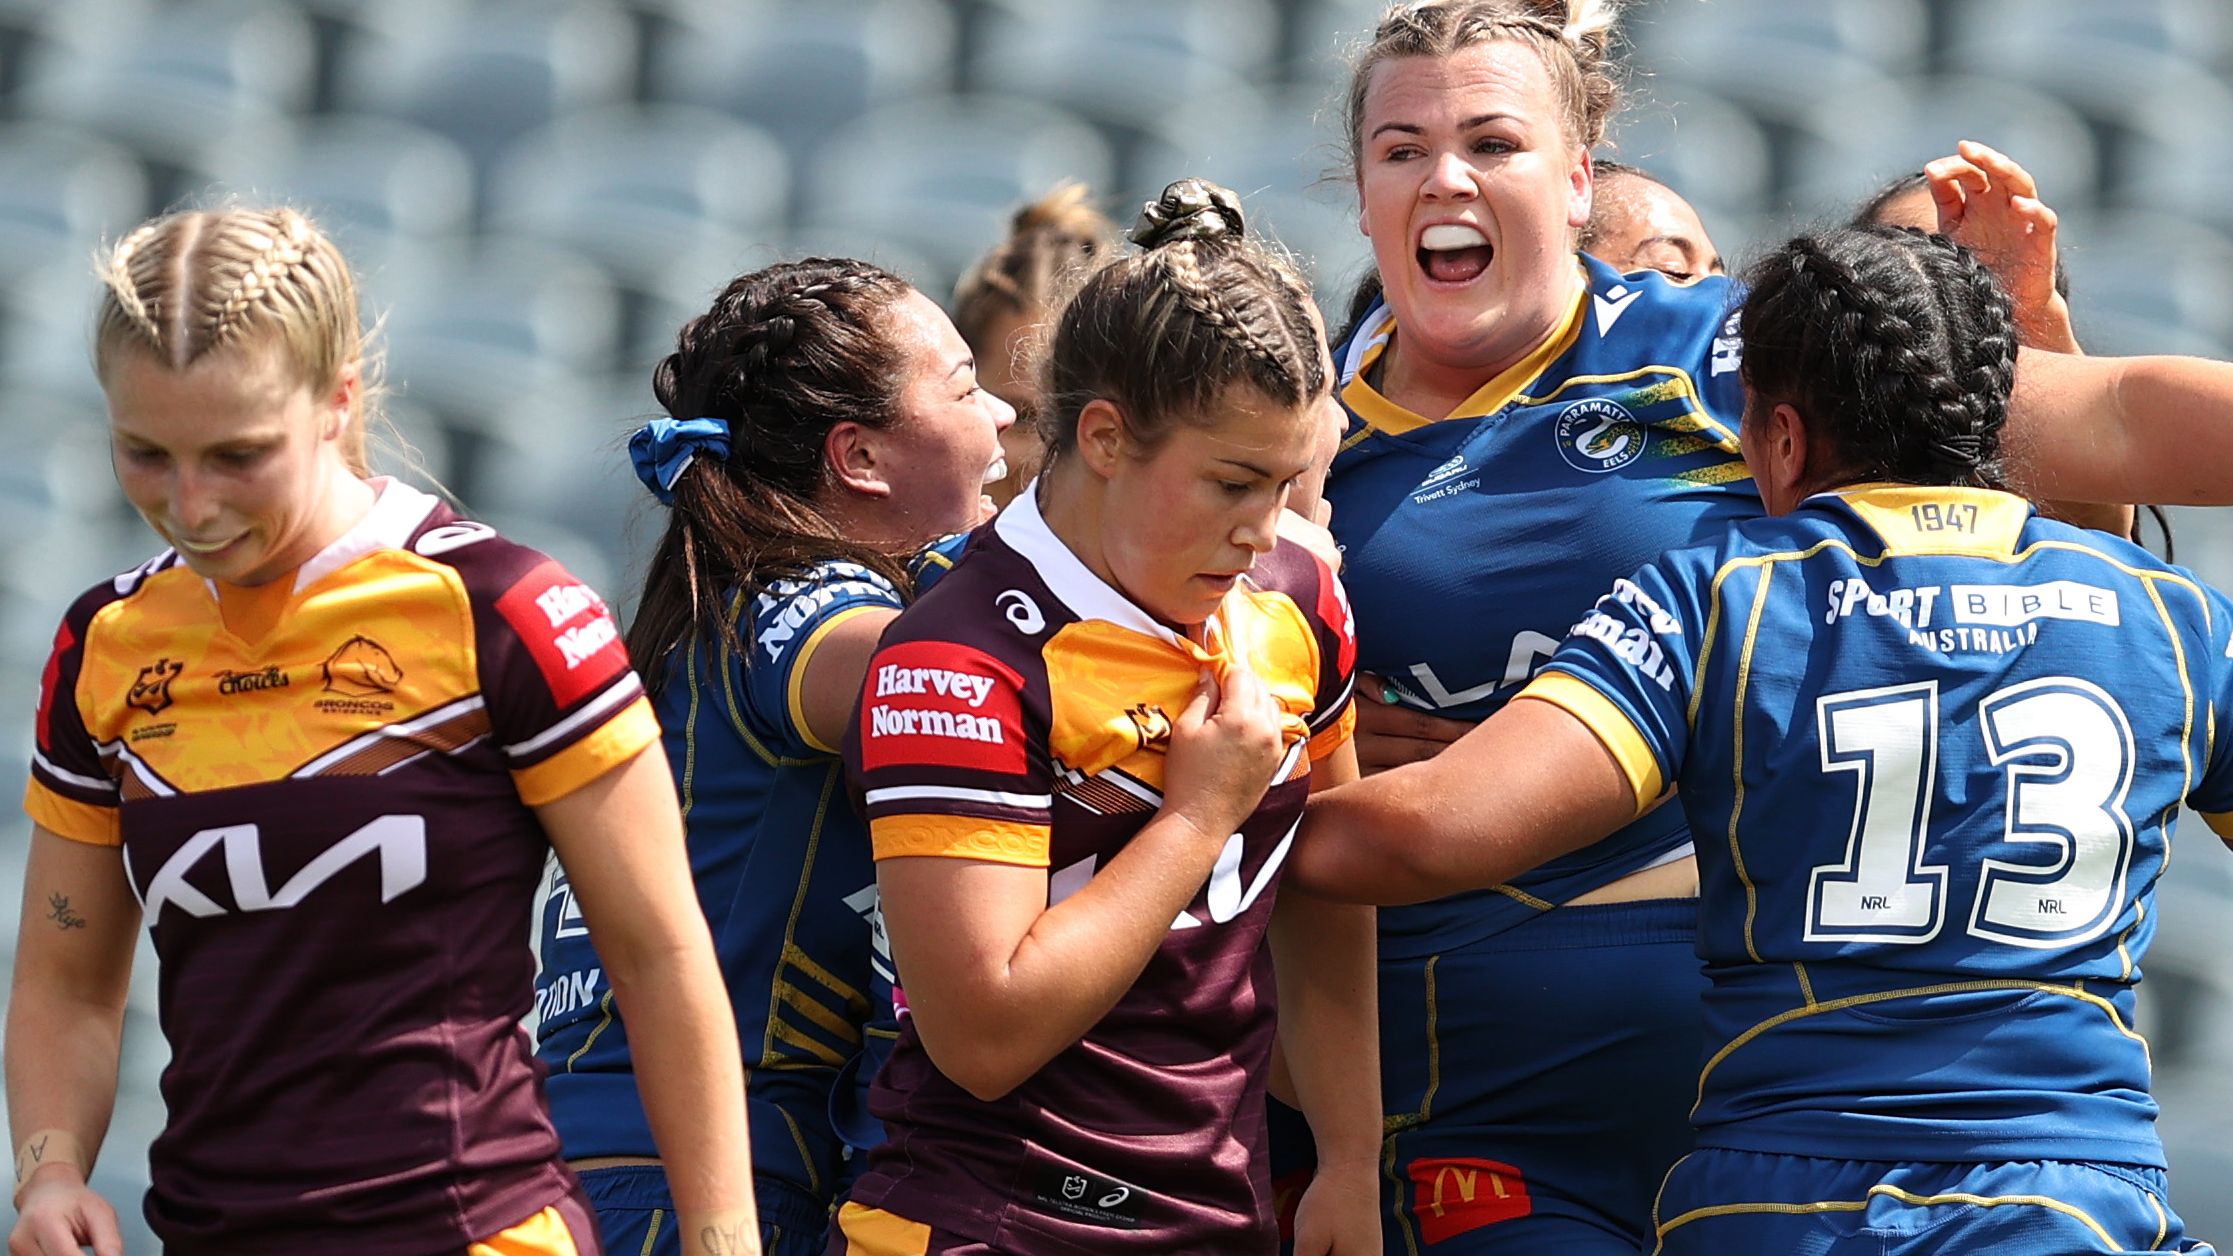 Ellie Johnston of the Eels celebrates a try against the Broncos.